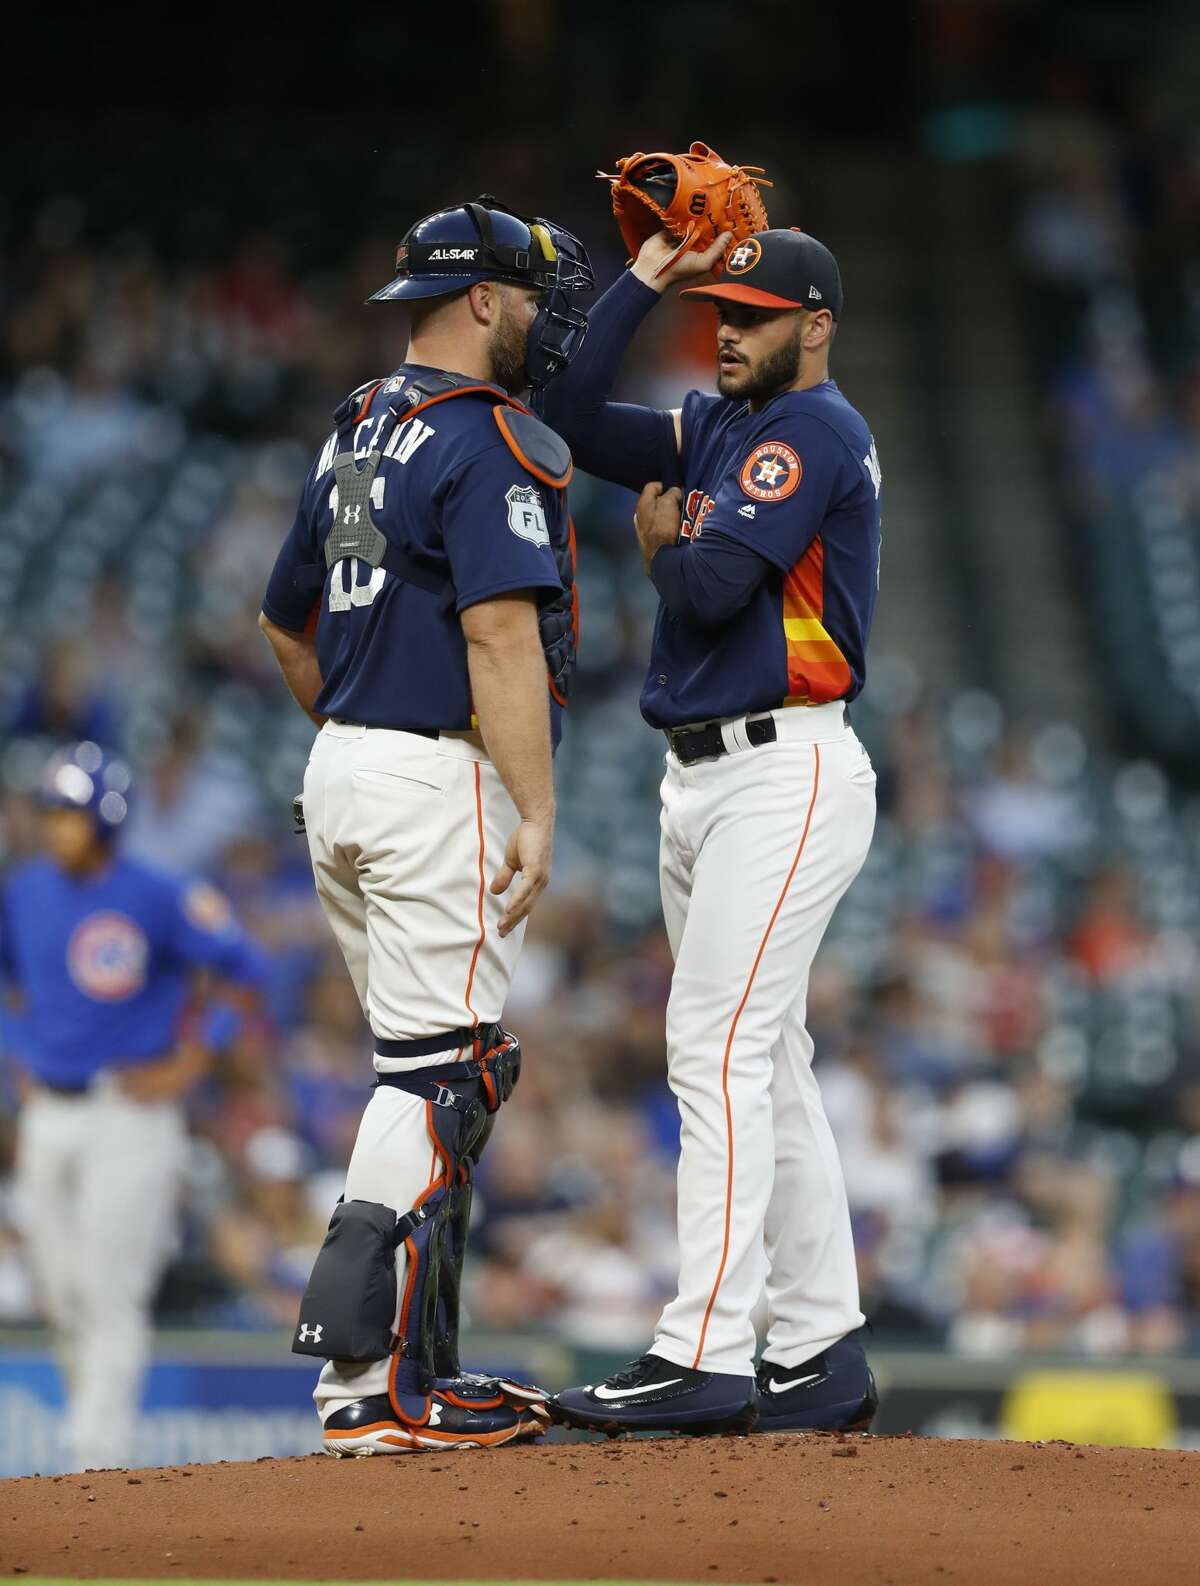 Houston Astros starting pitcher Lance McCullers Jr. (43) reacts with catcher Brian McCann (16) after giving up a run during the second inning of an MLB exhibition game at Minute Maid Park, Thursday, March 30, 2017, in Houston. ( Karen Warren / Houston Chronicle )